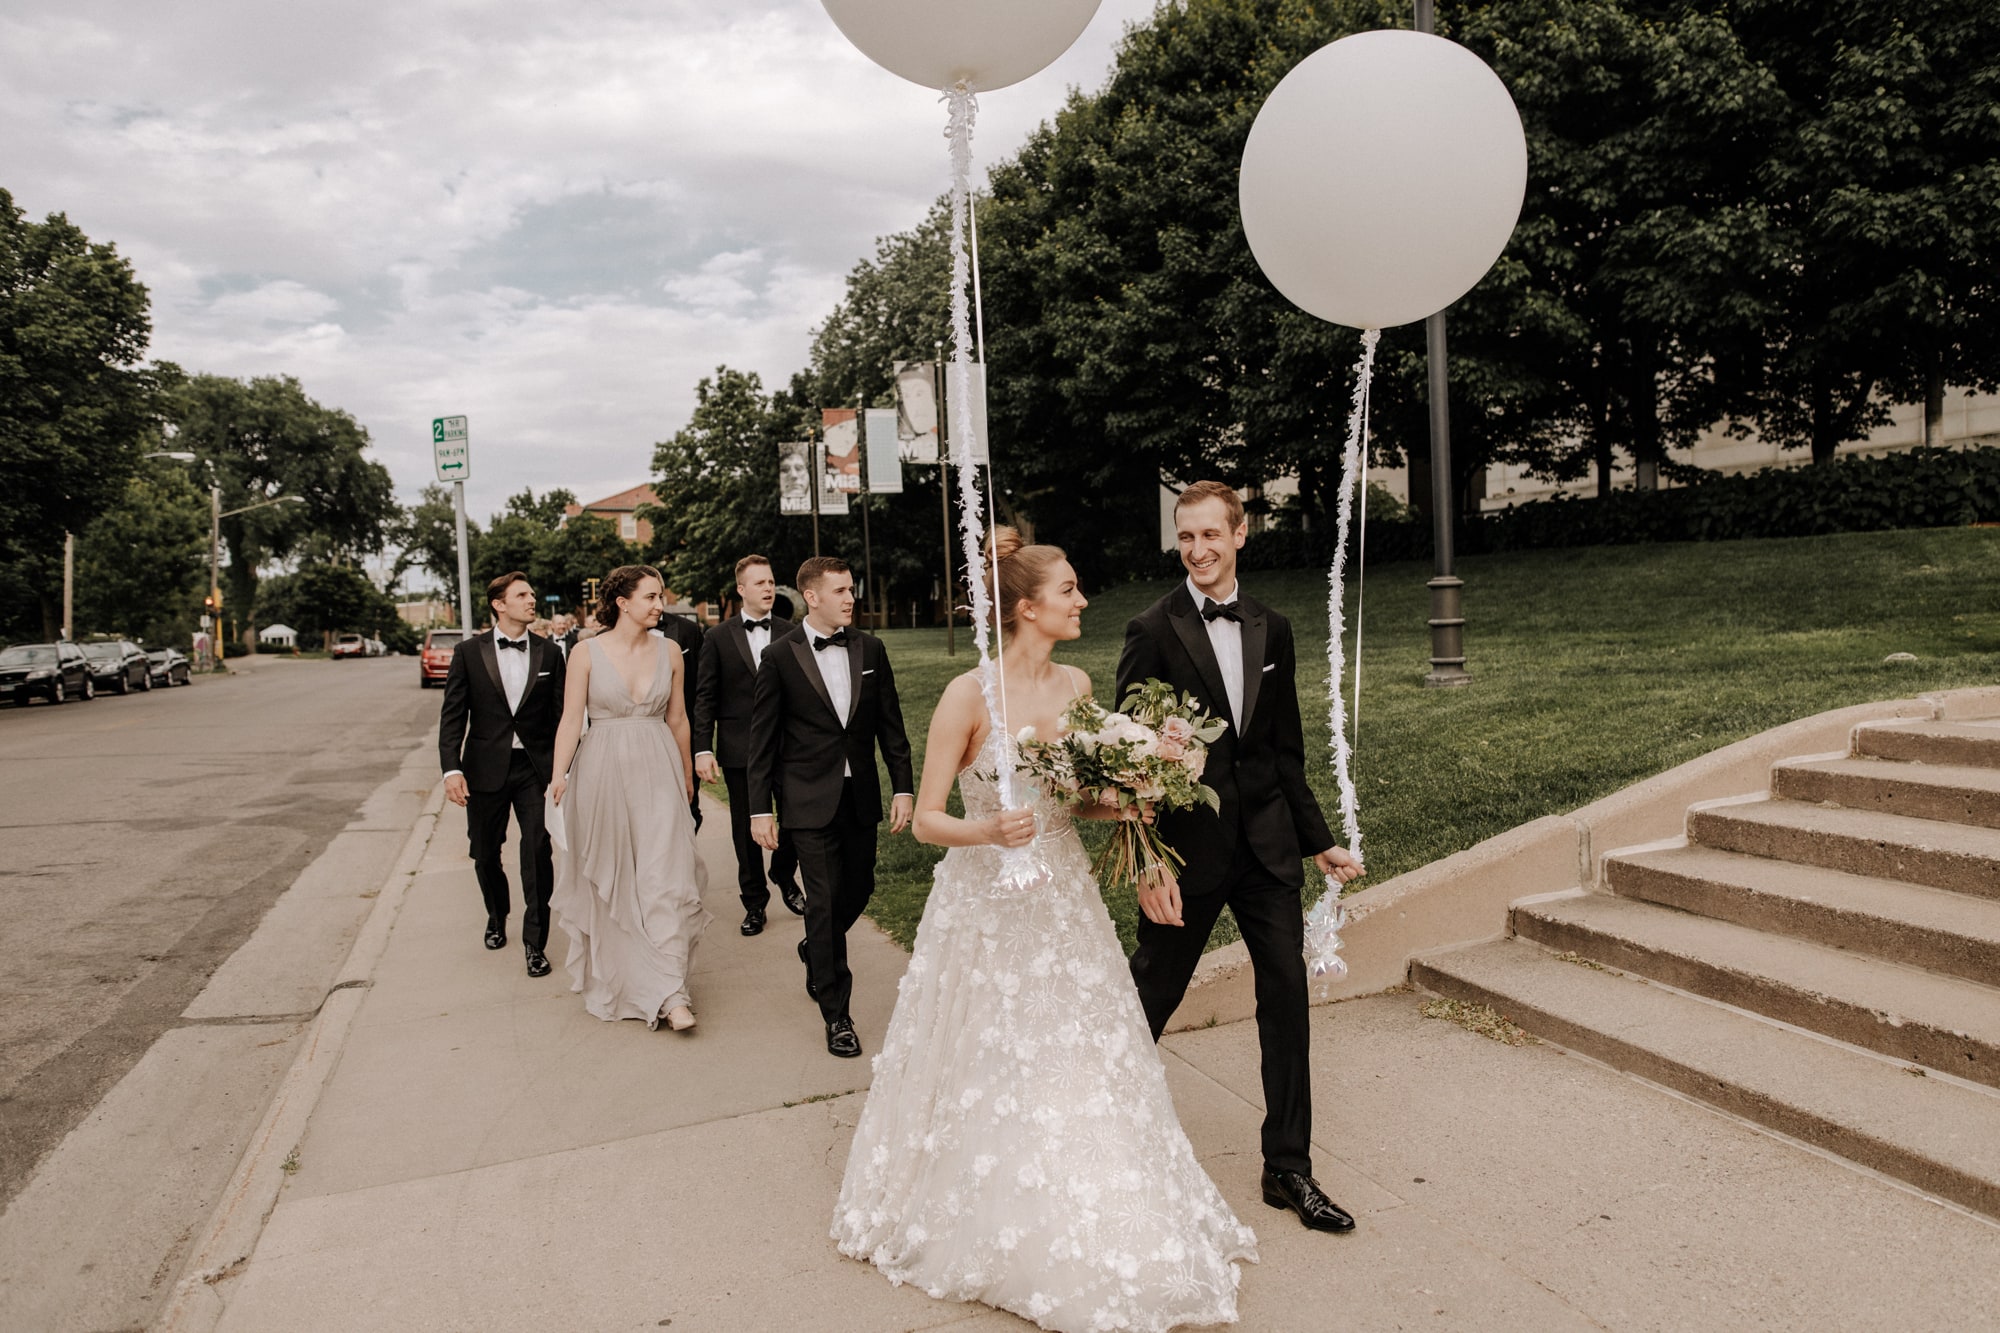 A newlywed bride and groom smile at each other while holding large white balloons and walking down the street with their wedding party in Minneapolis.